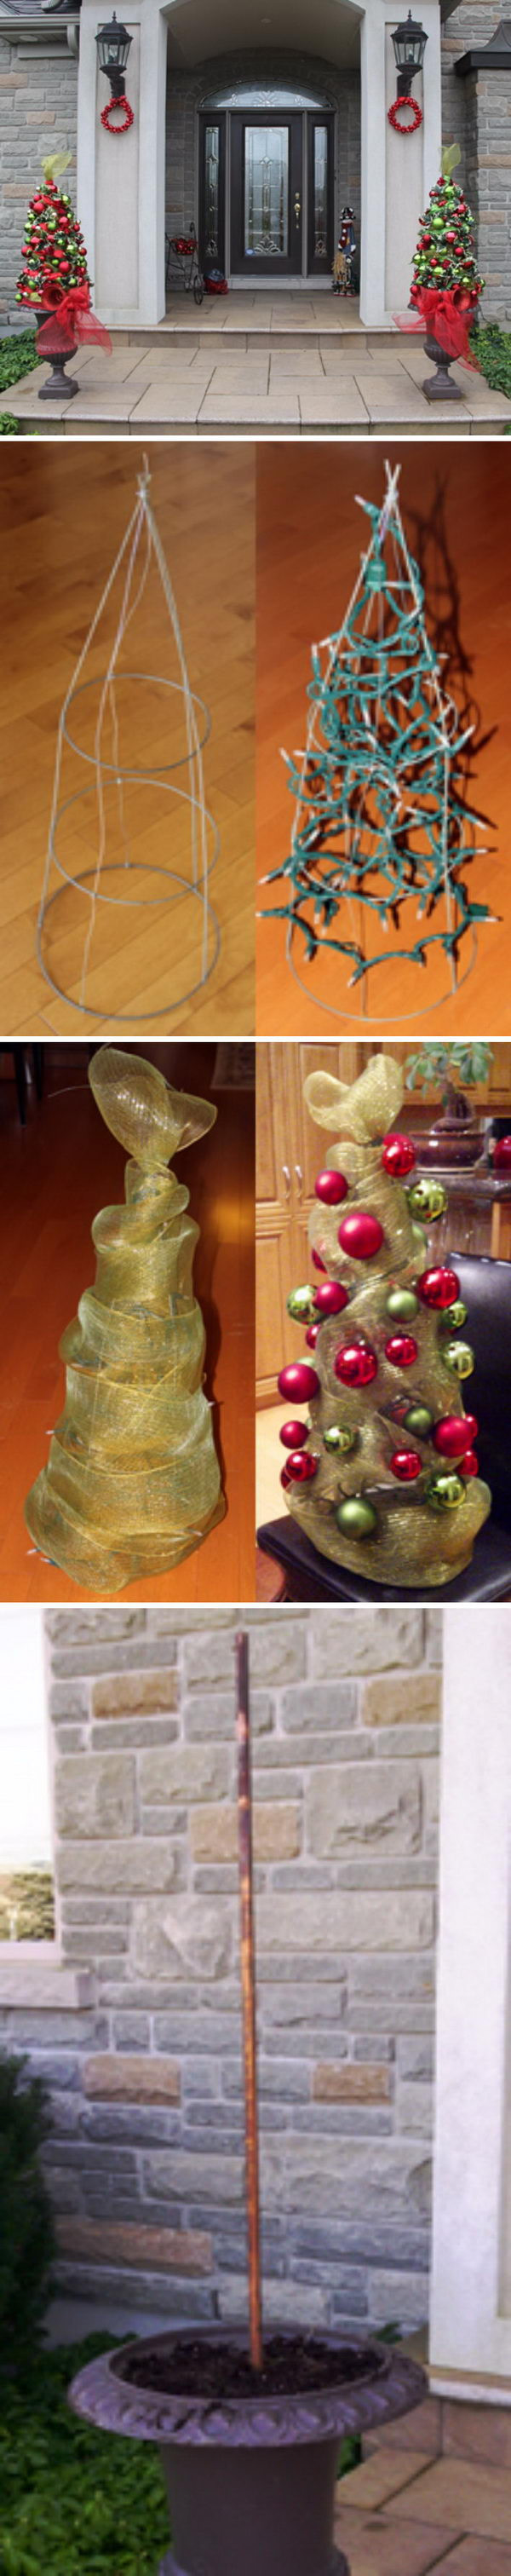 DIY Outdoor Christmas Trees
 40 Festive Outdoor Christmas Decorations